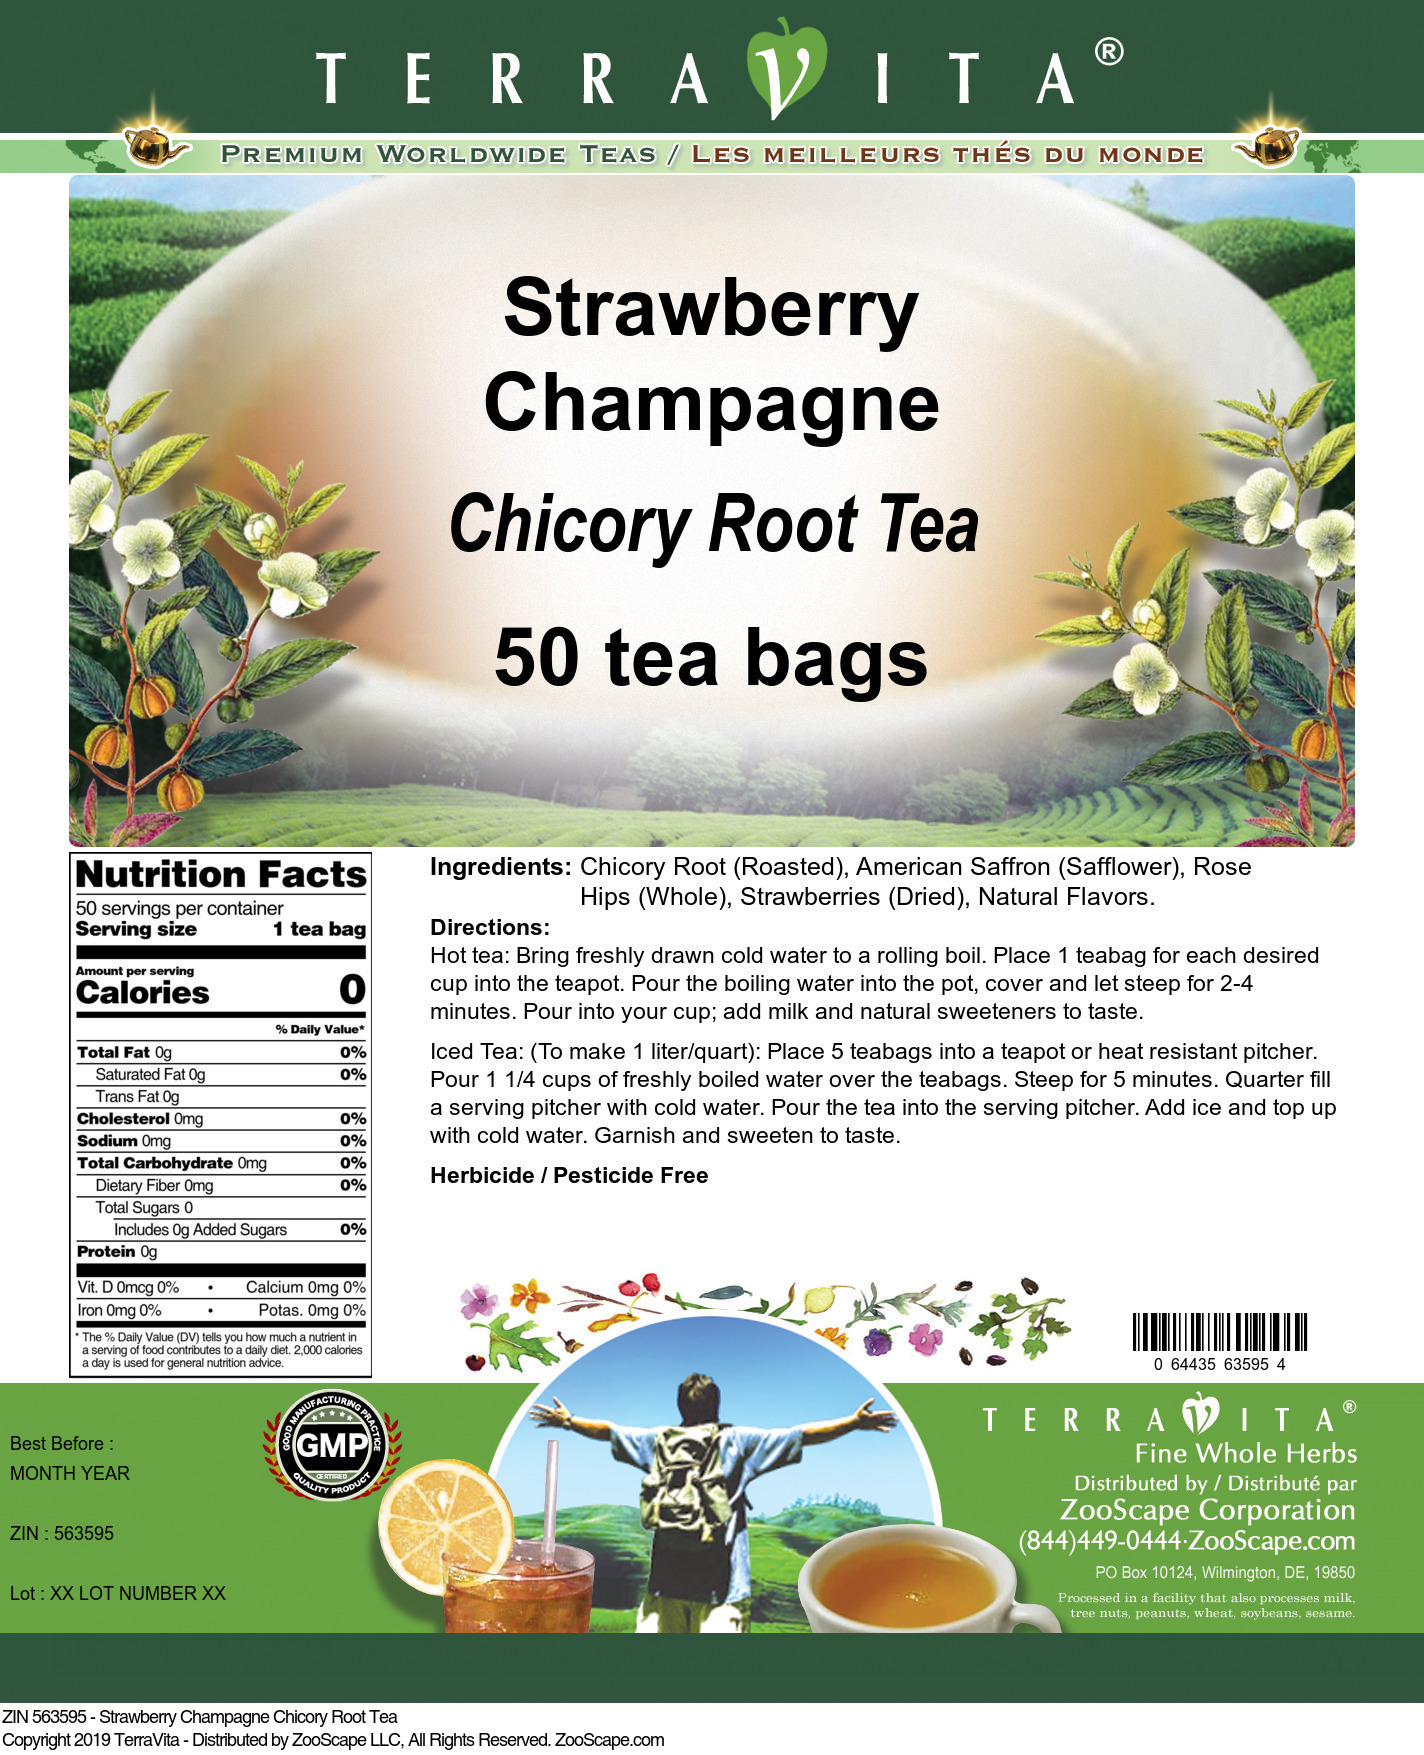 Strawberry Champagne Chicory Root Tea - Label